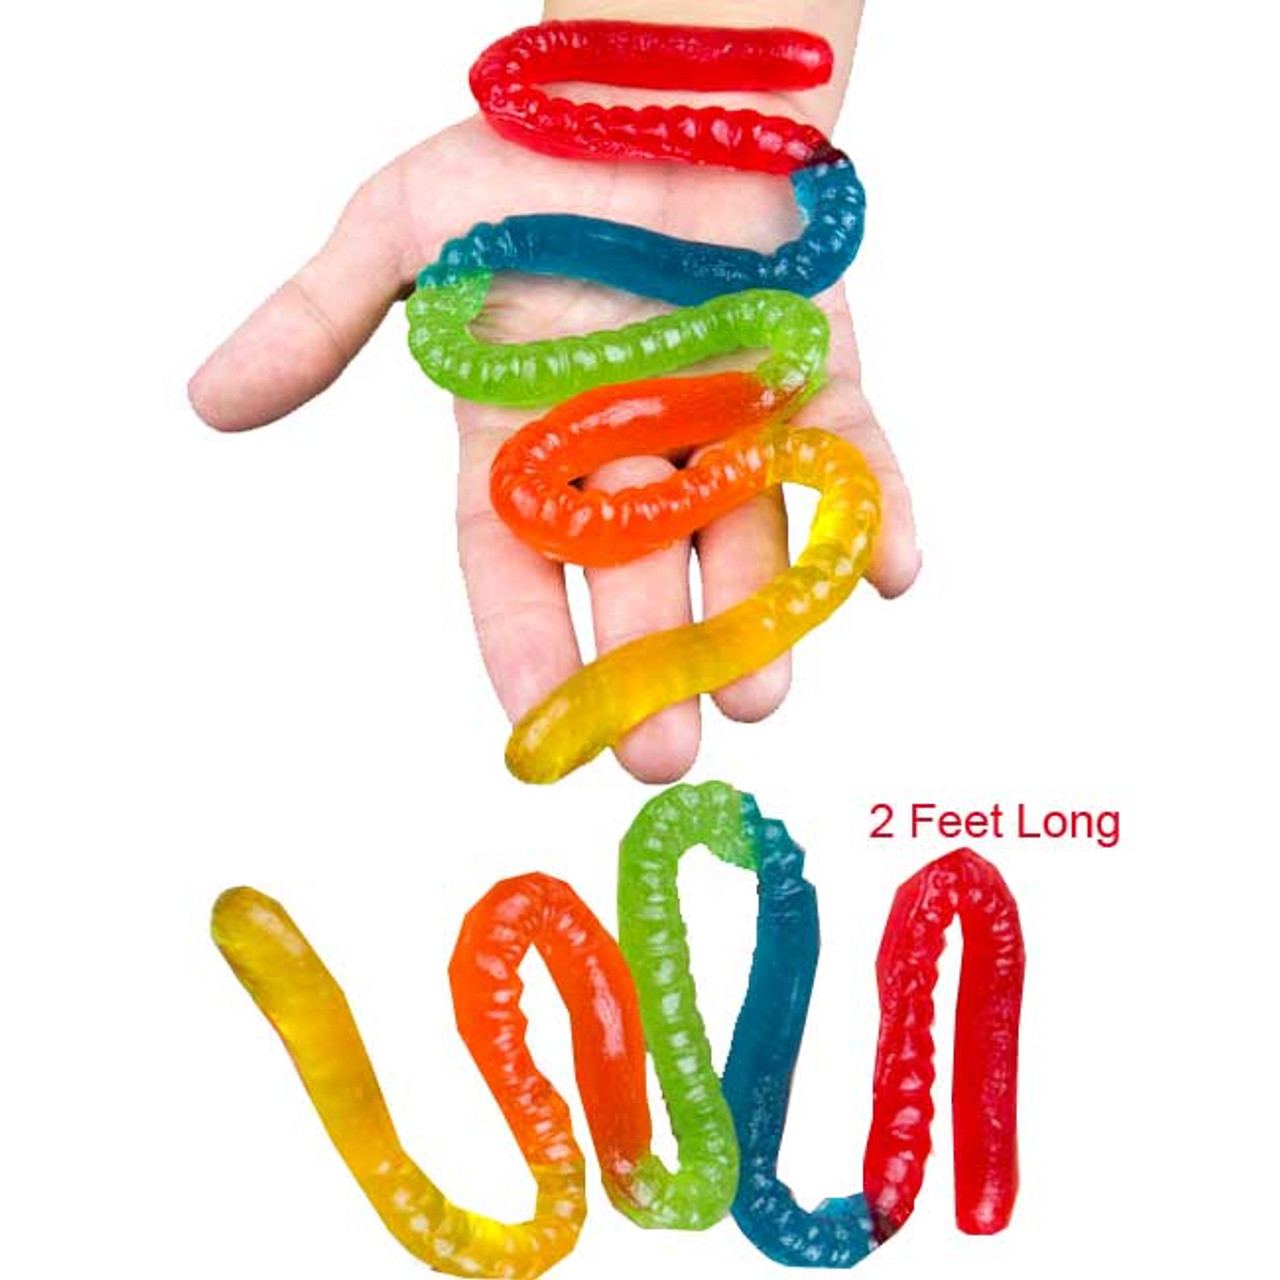 danielle chaves recommends 2 Ft Gummy Worm